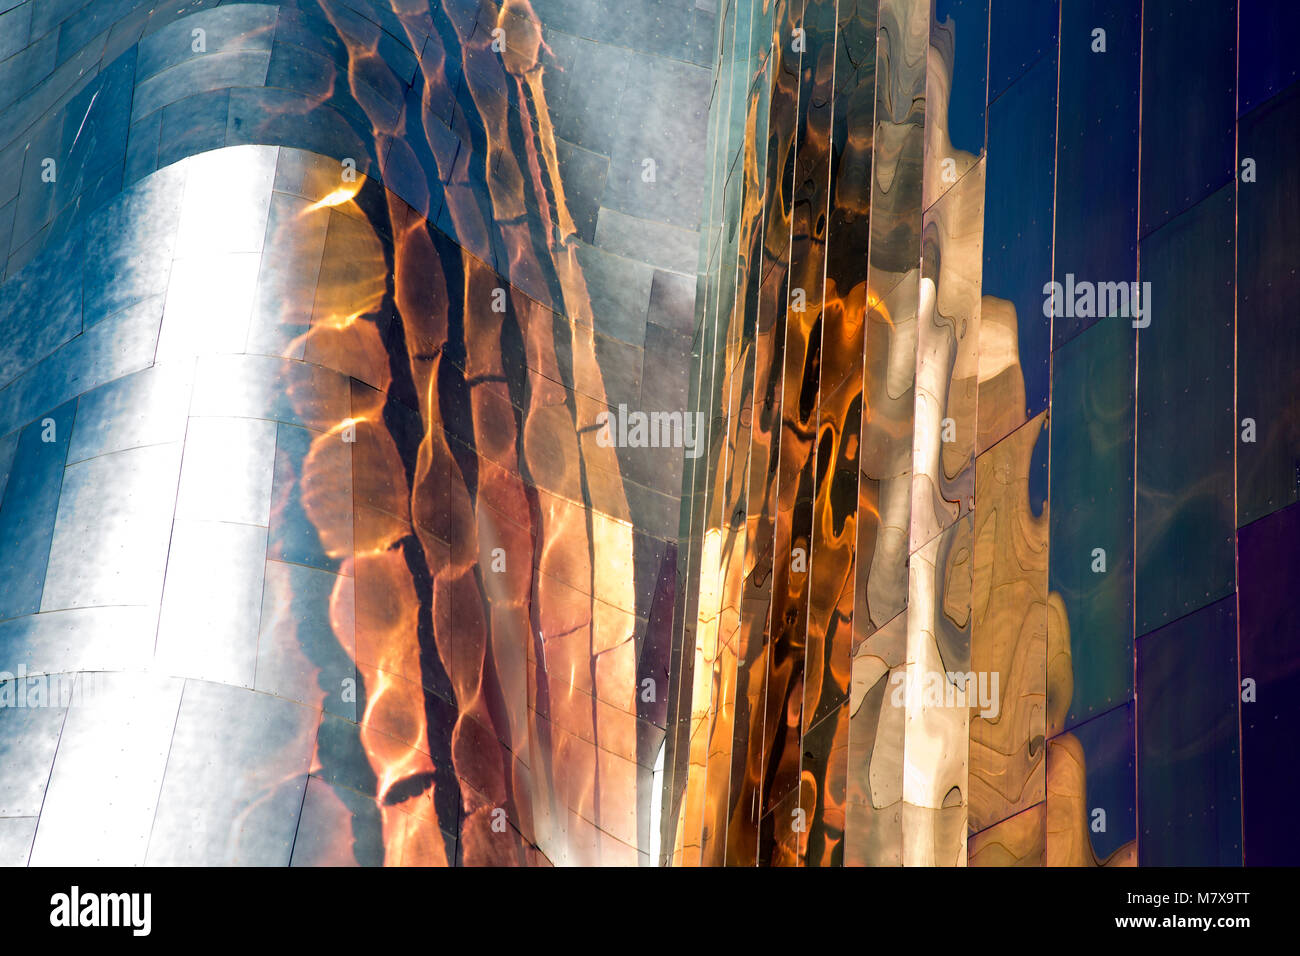 WA13803-00...WASHINGTON - Colorful reflections on the already colorful walls of the Museum of Pop Culture at the Seattle Center. 2017 Stock Photo